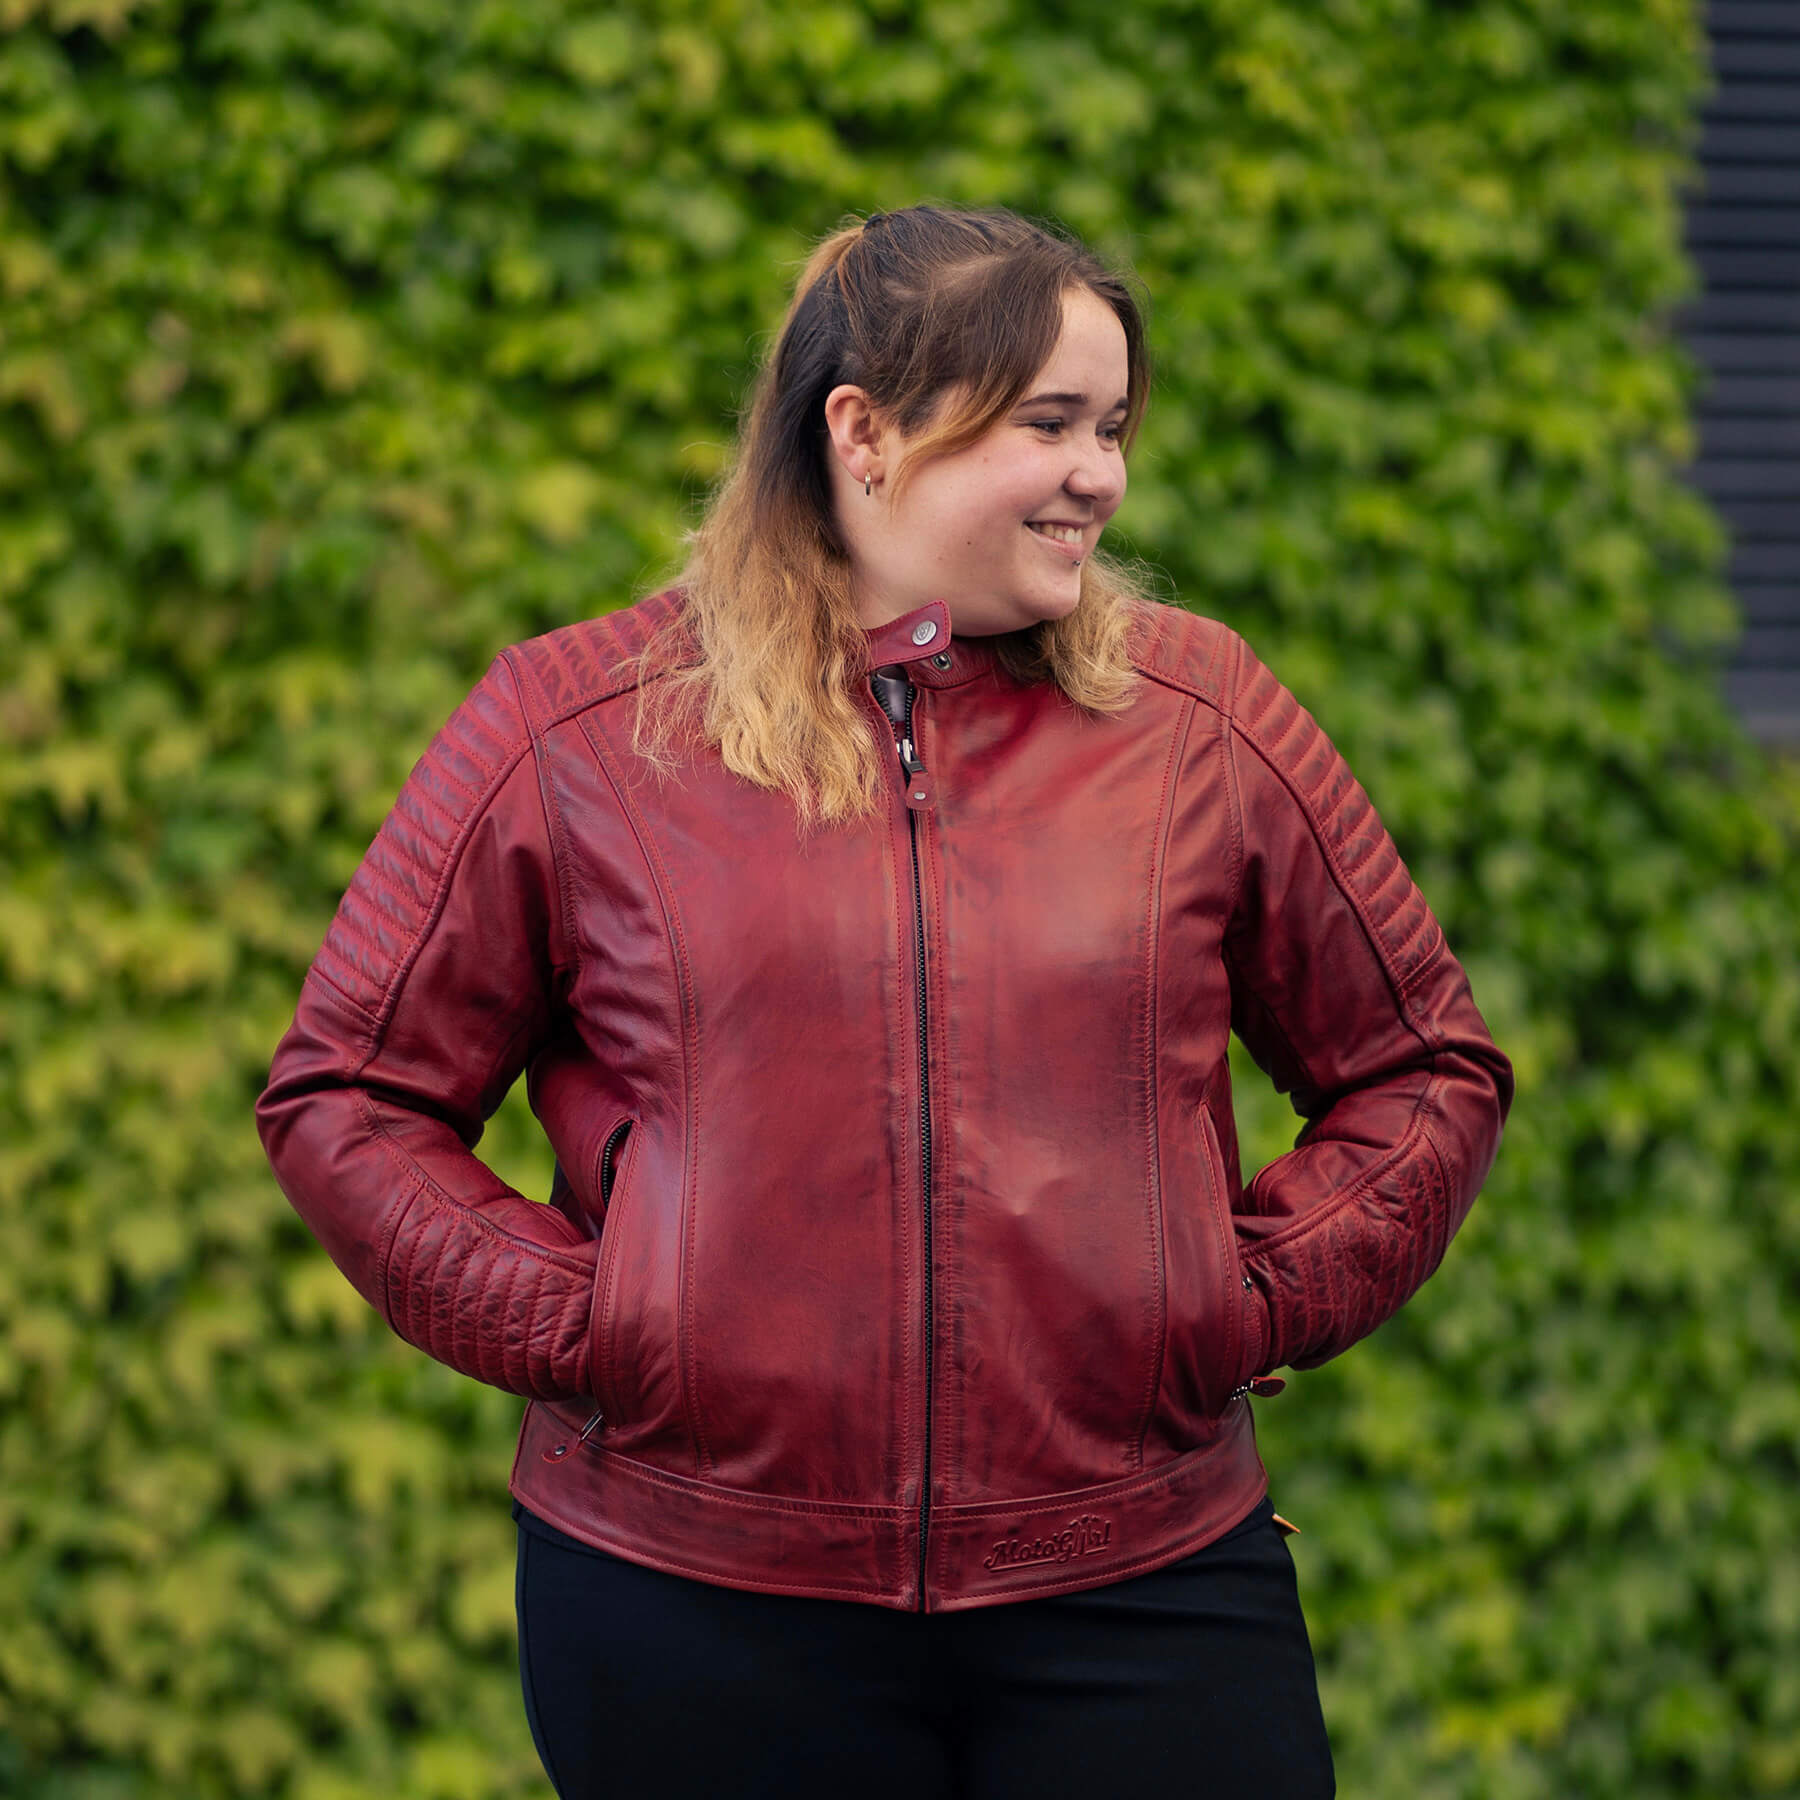 Women's Plus Size Leather: Plus Size Jackets & More - Wilsons Leather